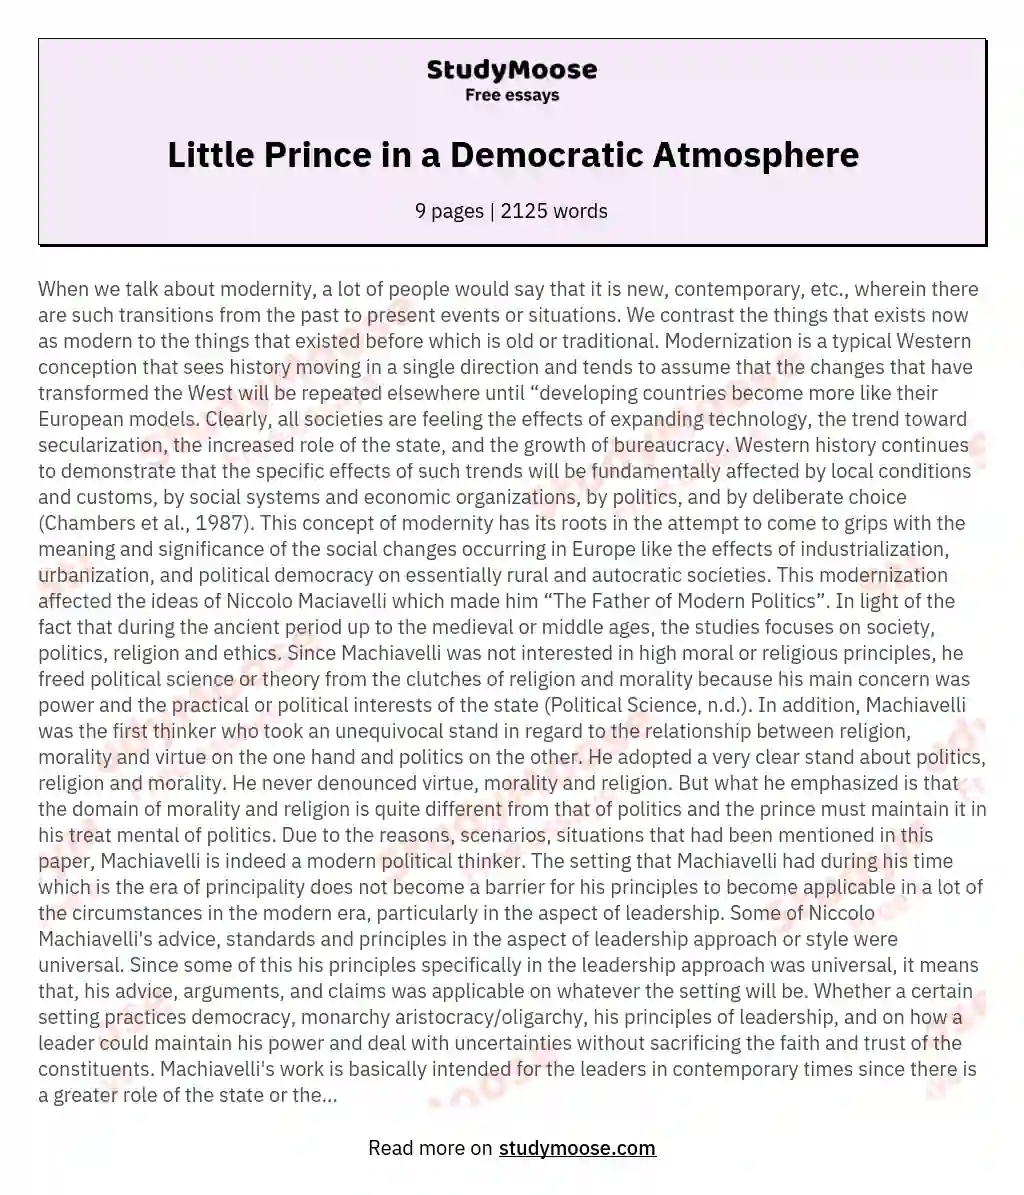 Little Prince in a Democratic Atmosphere essay